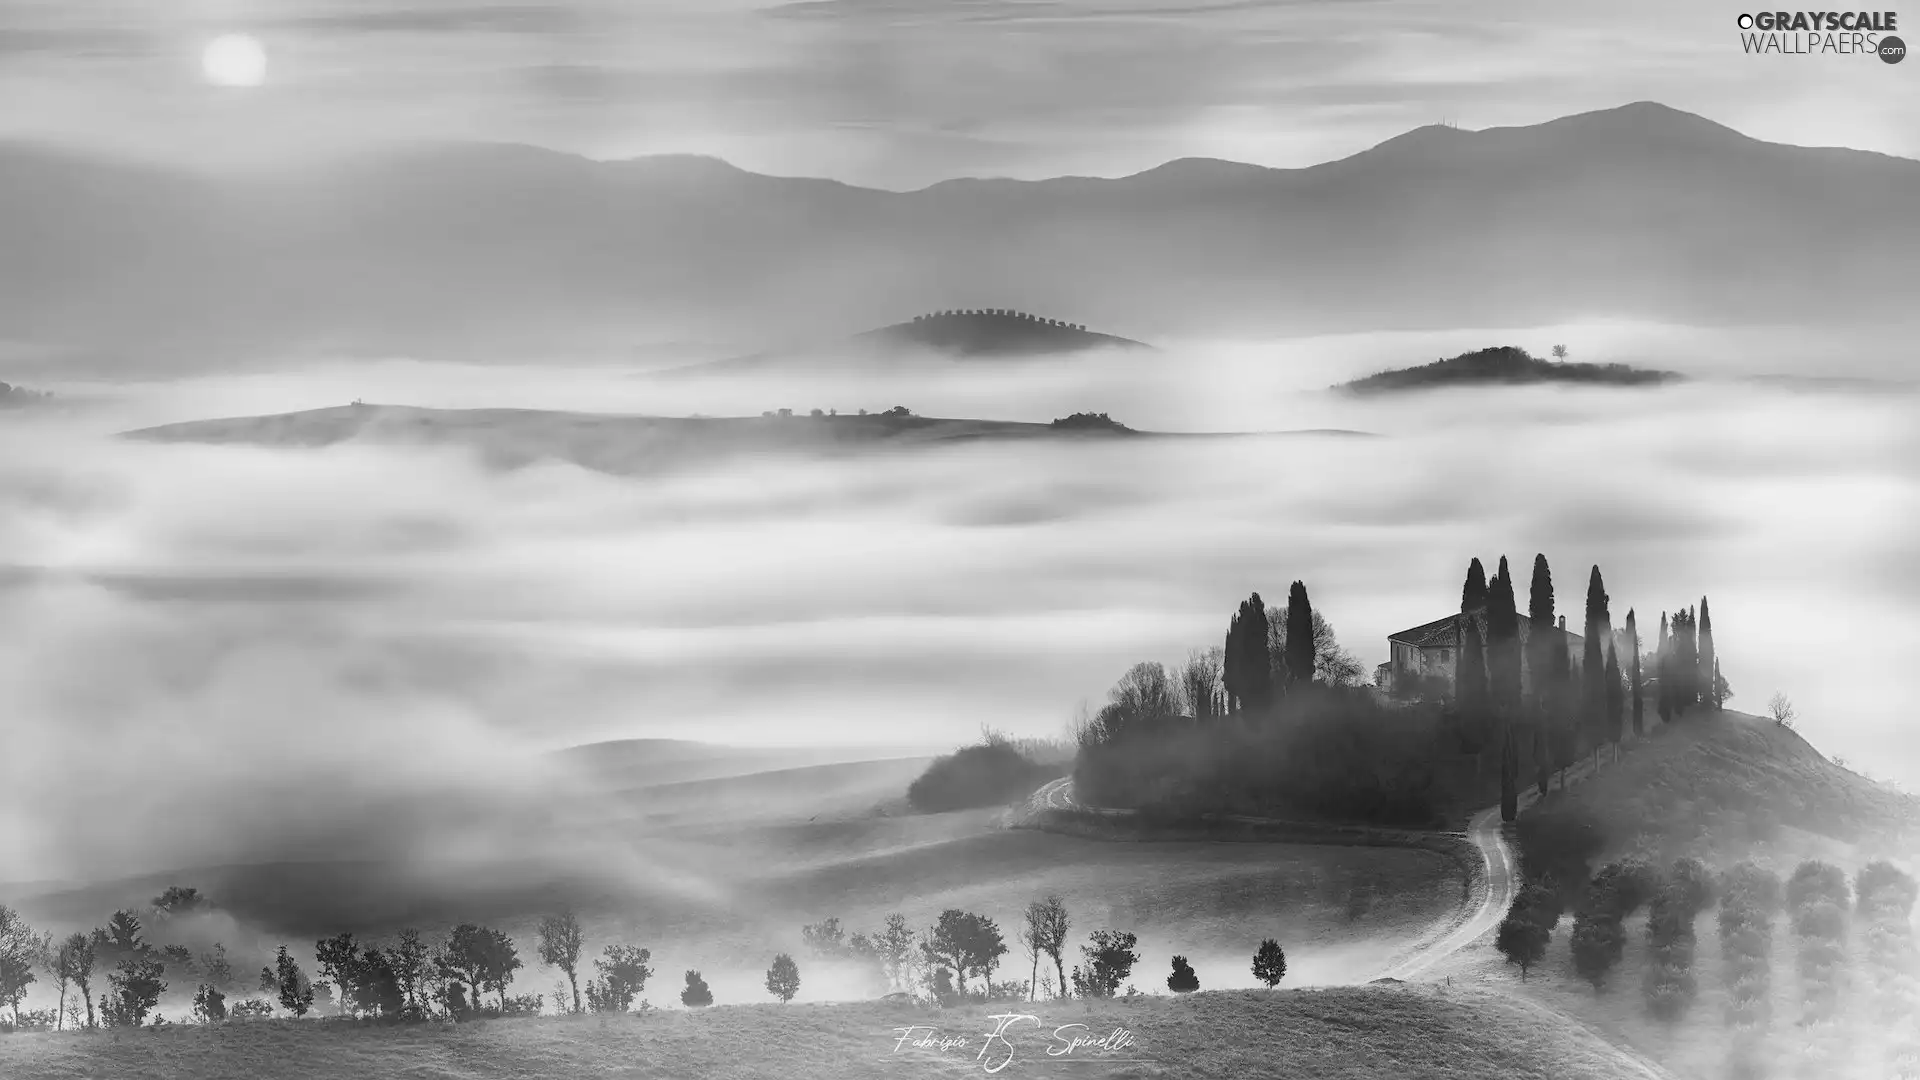 Tuscany, Italy, Hill, Fog, Way, house, viewes, cypresses, trees